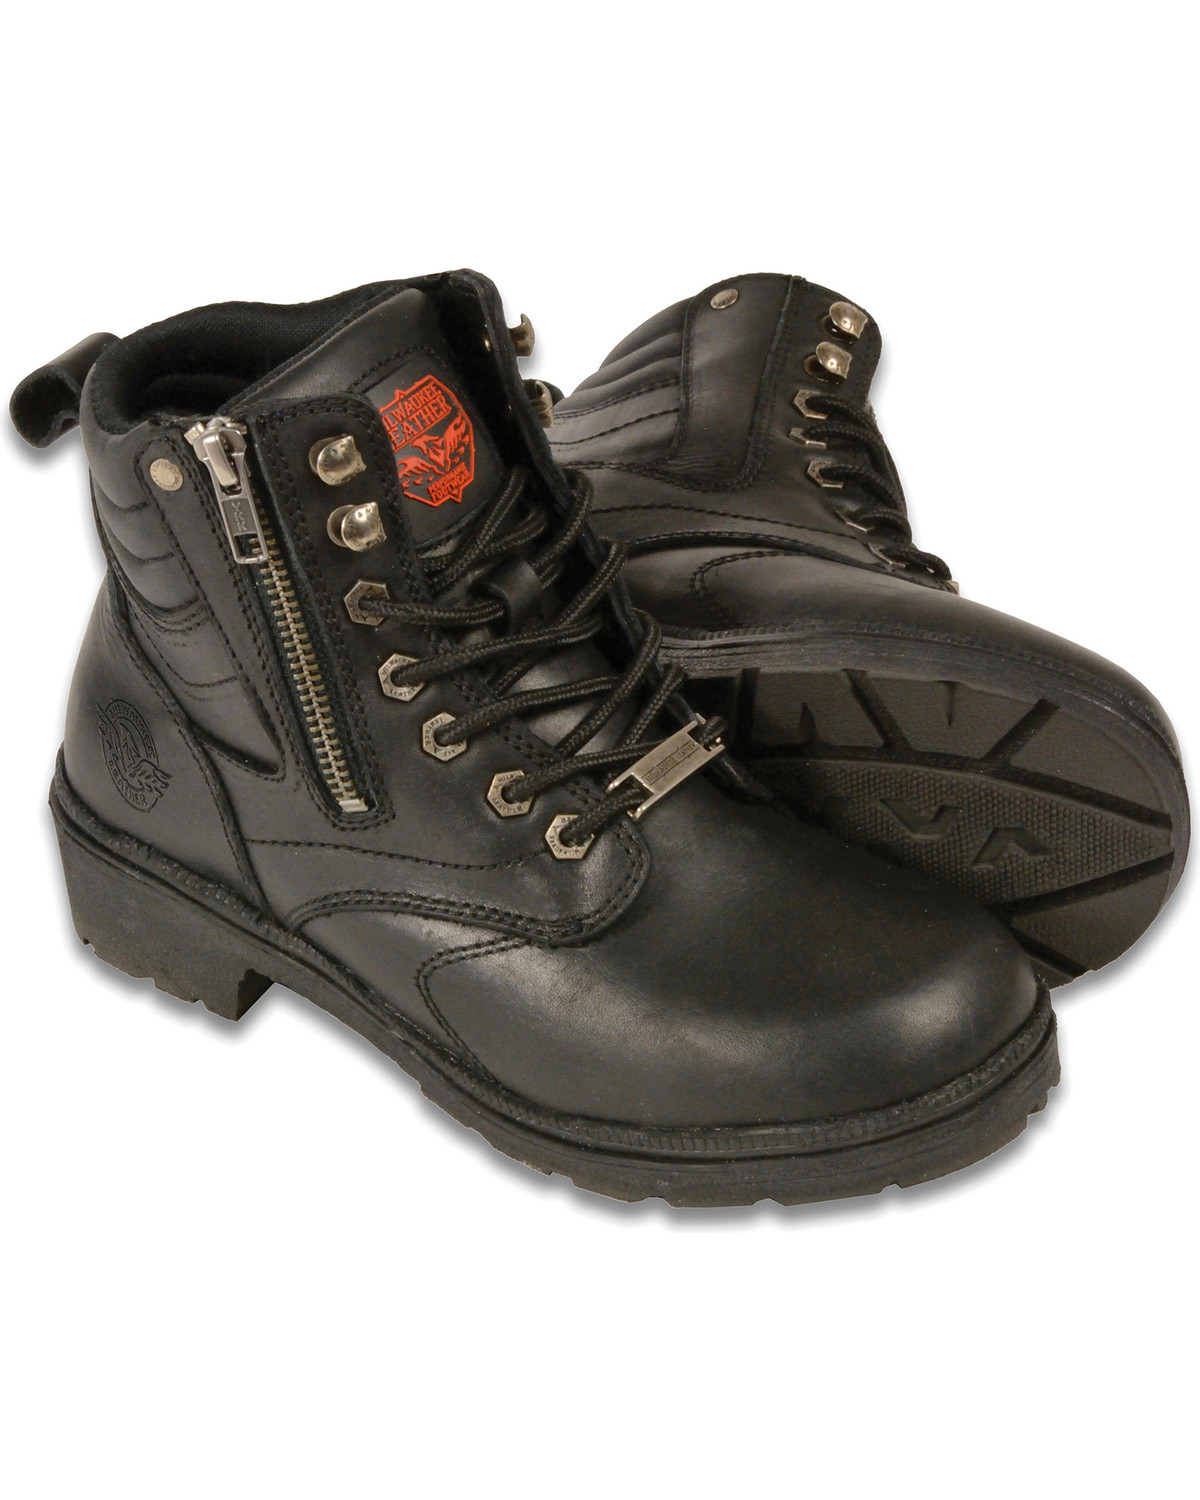 black work boots with side zipper